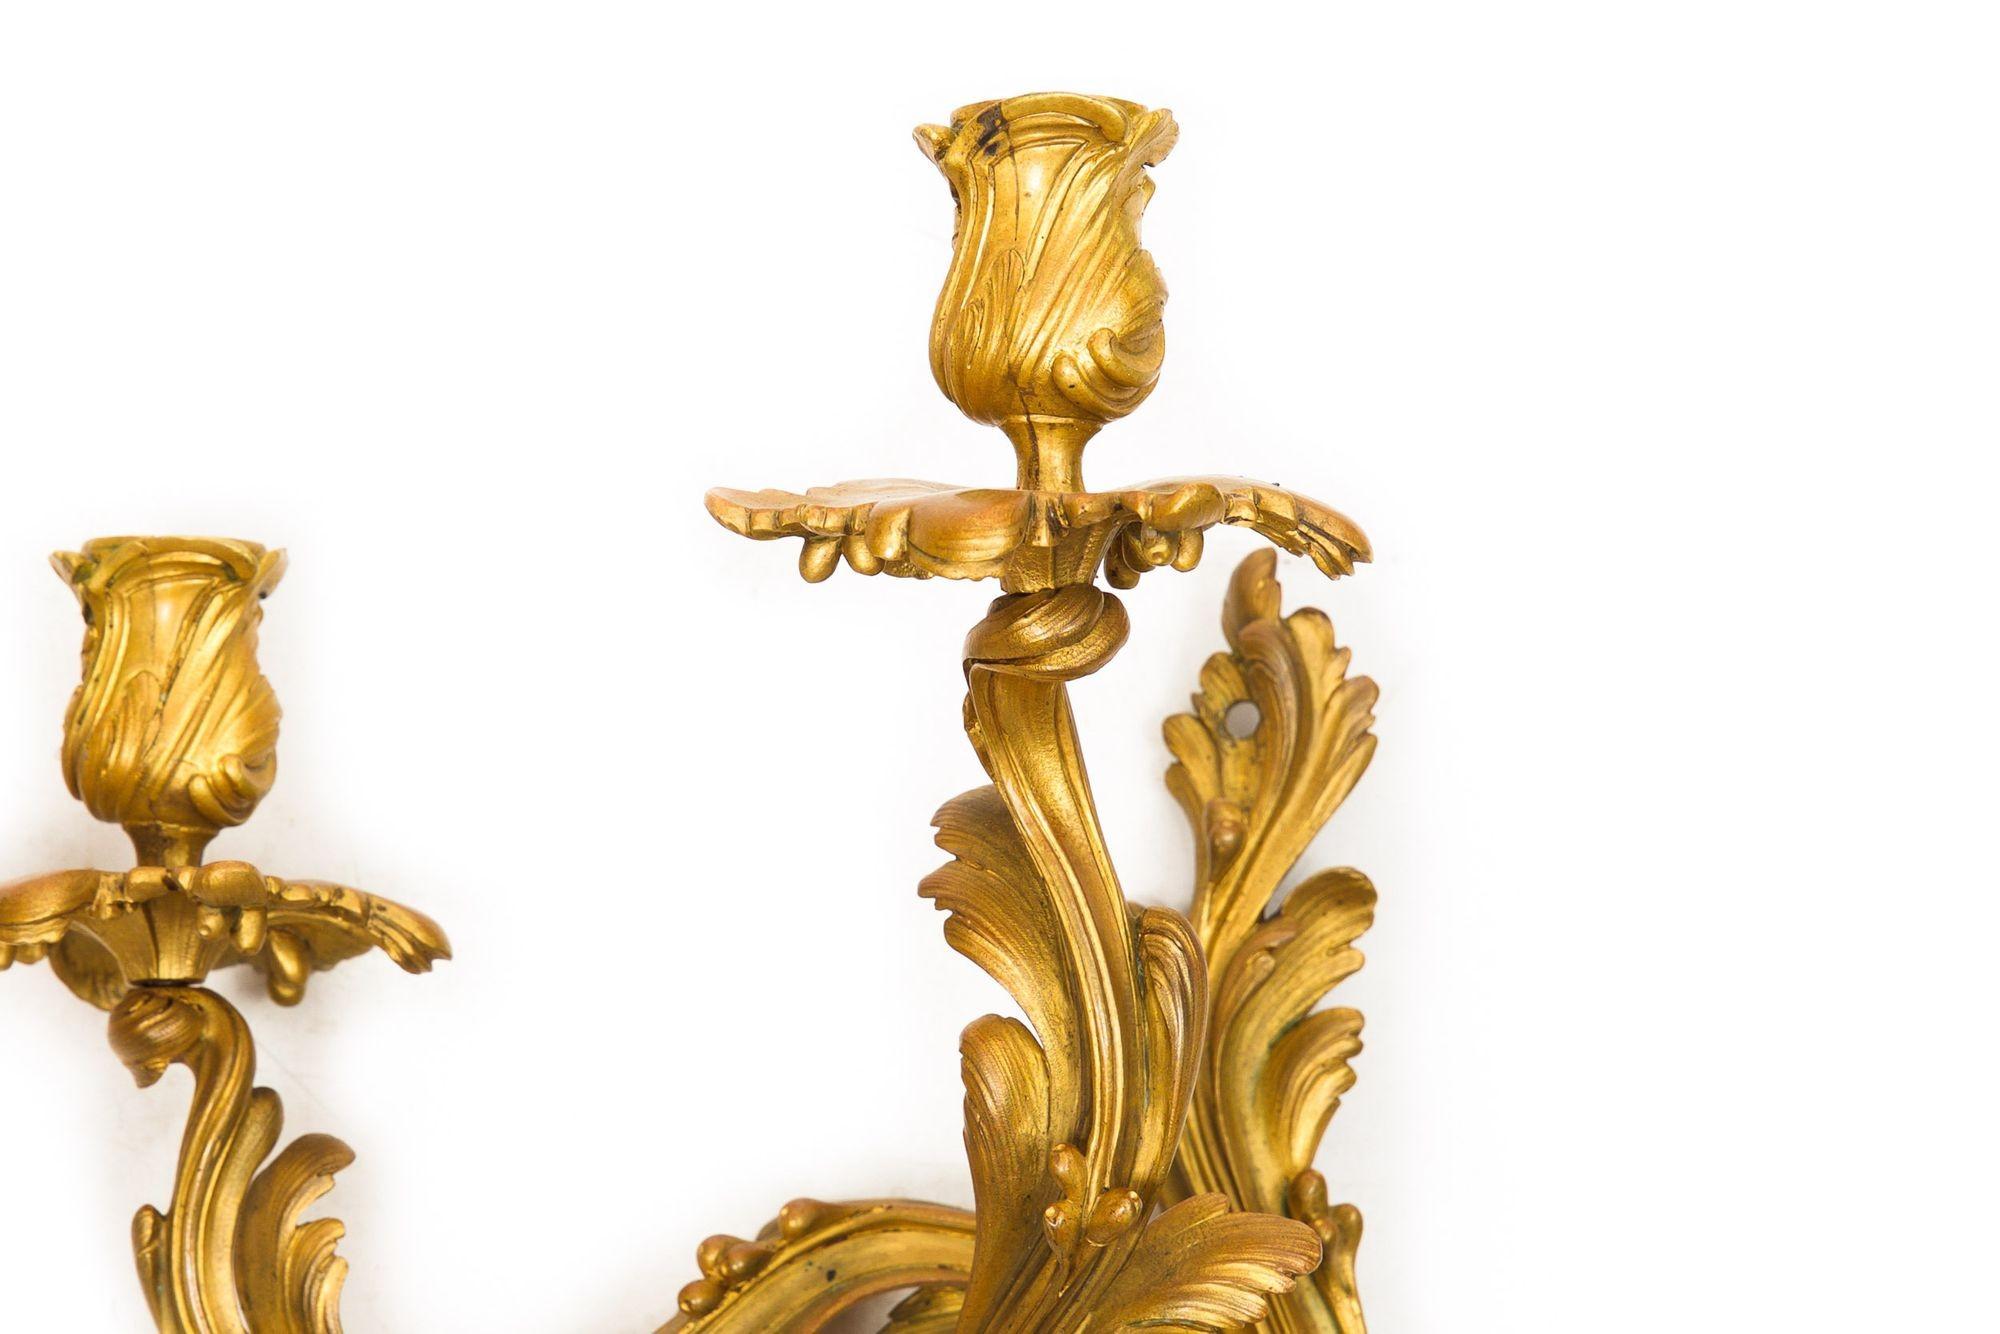 A good pair of sand-cast bronze two-branch sconces in the Louis XV taste from the second-half of the 19th century, they feature beautifully textured fronds throughout the foliage. The pair have never been electrified. A very nice decorative